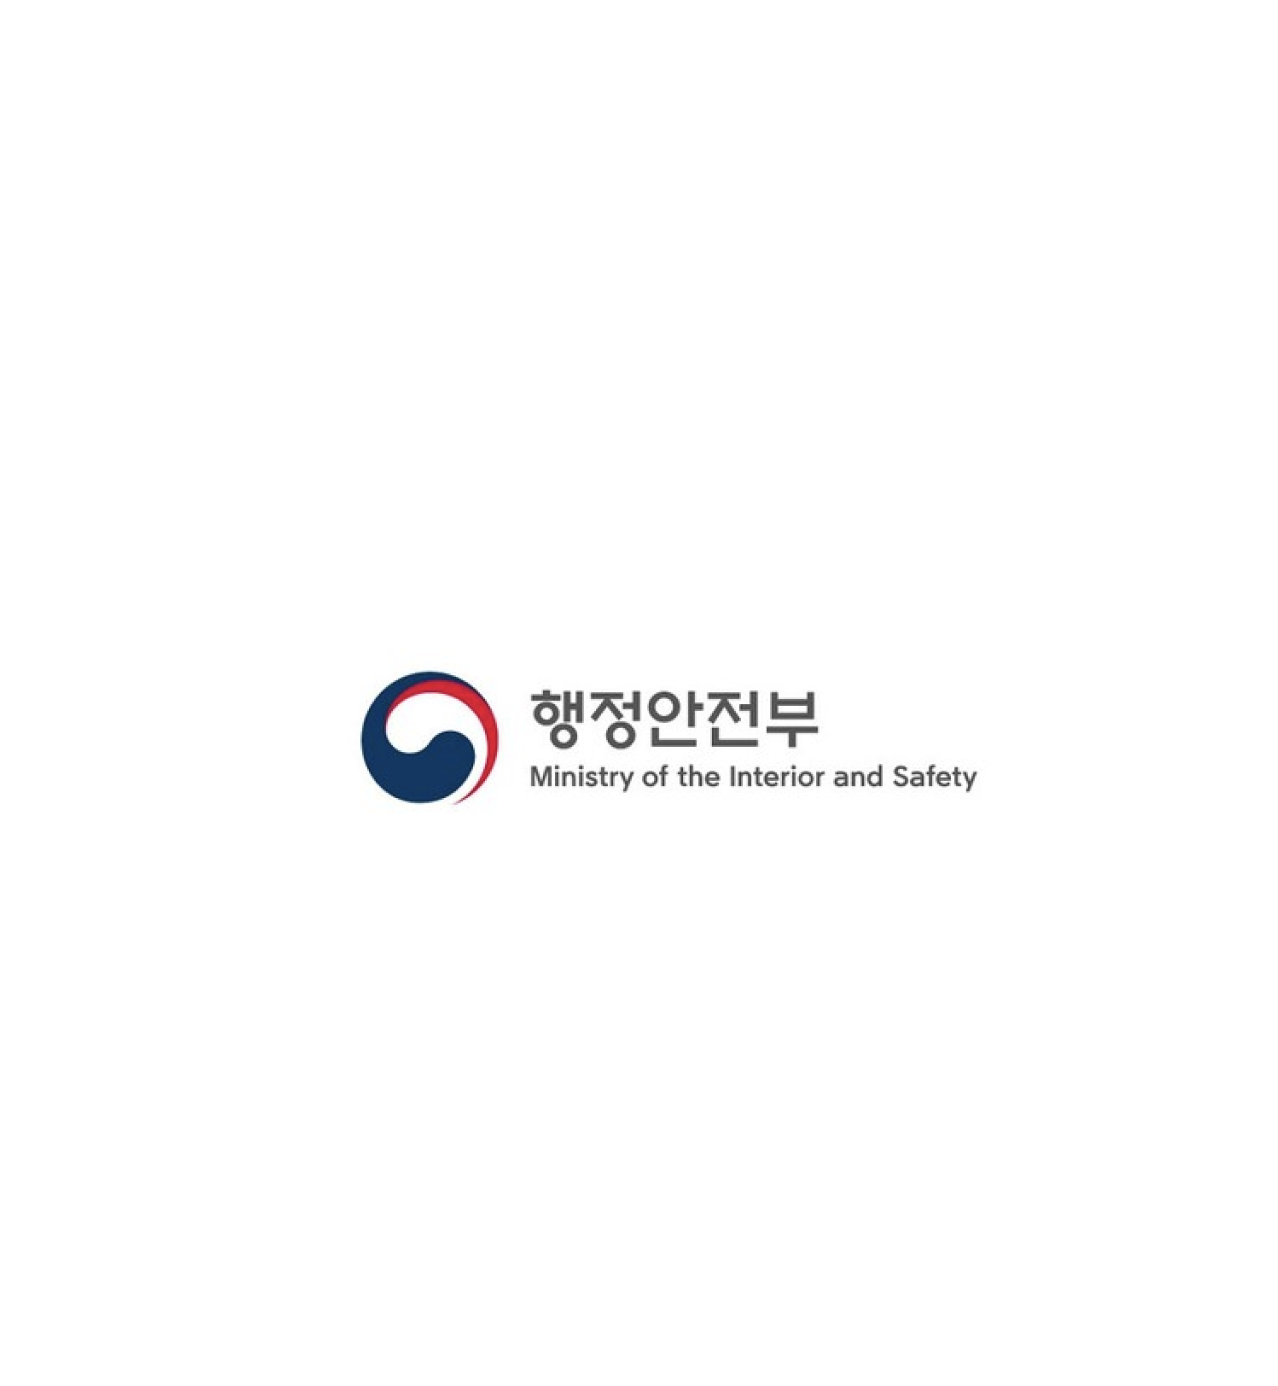 Republic of Korea Ministry of Public Administration and Security